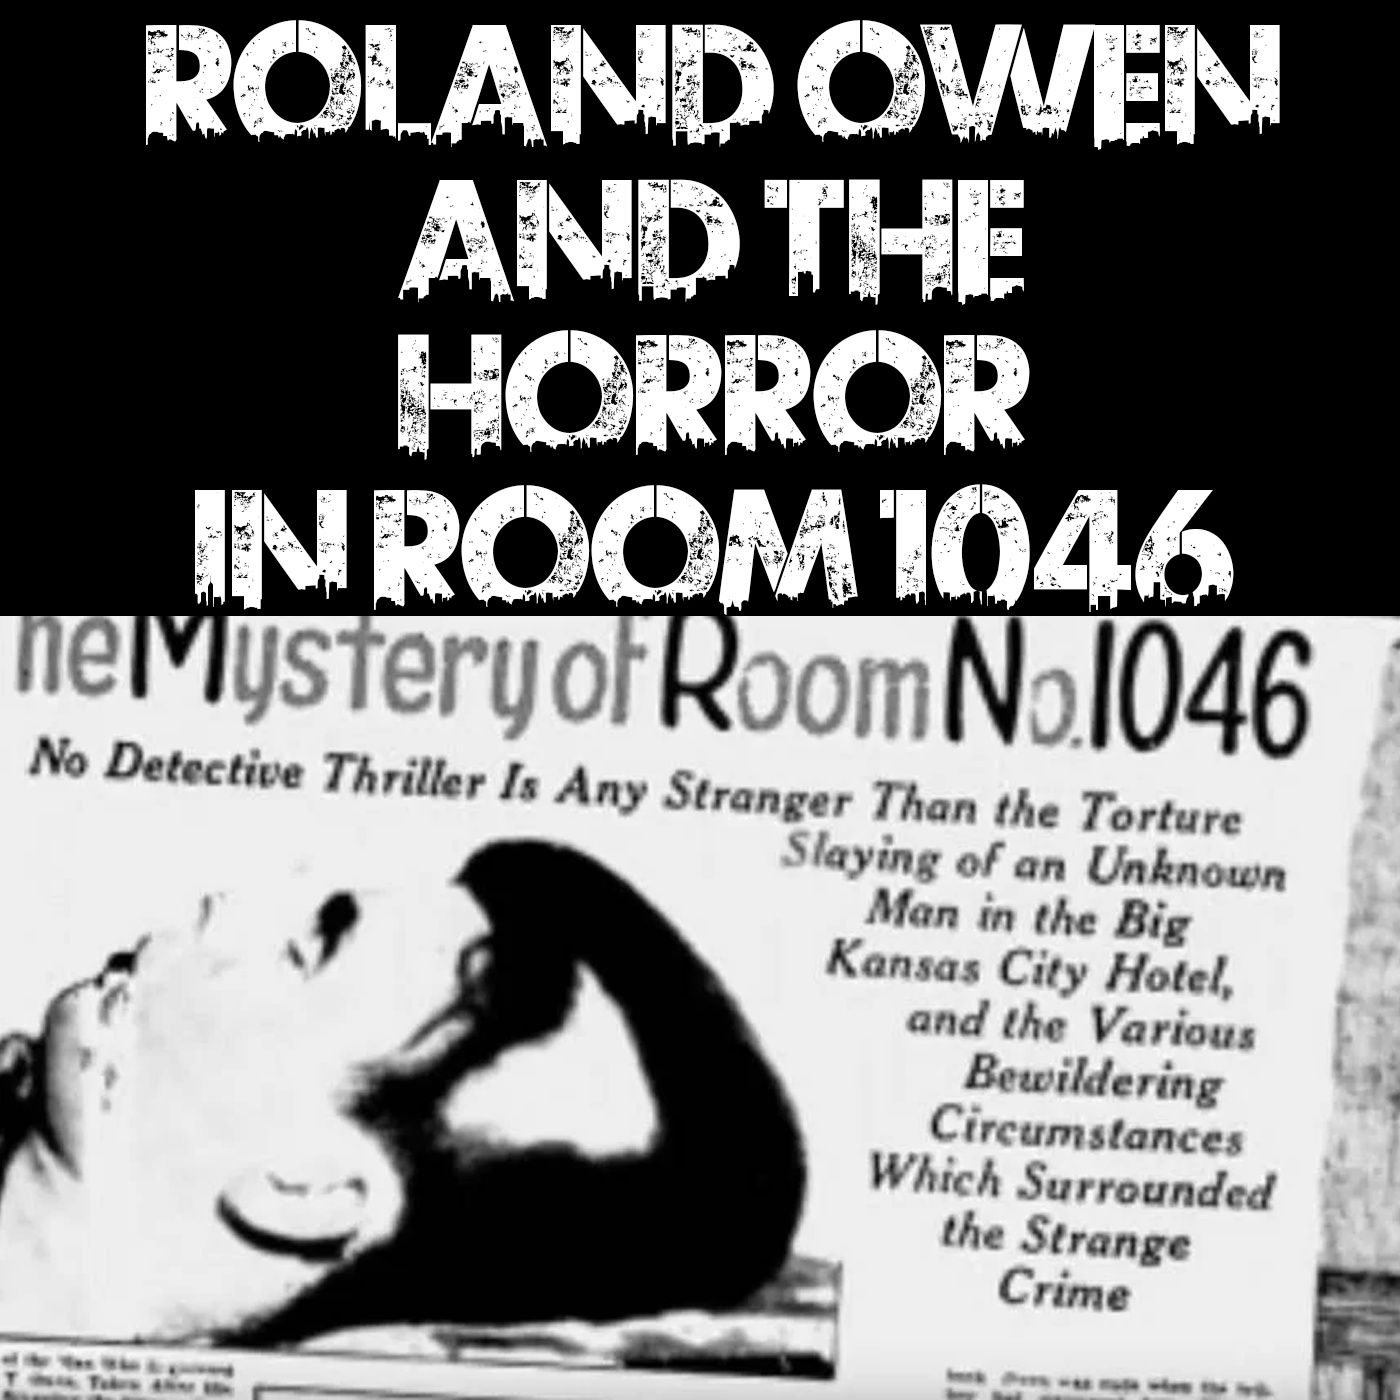 Roland Owen And The Horror In Room 1046 From The Brohio Podcast On Hark